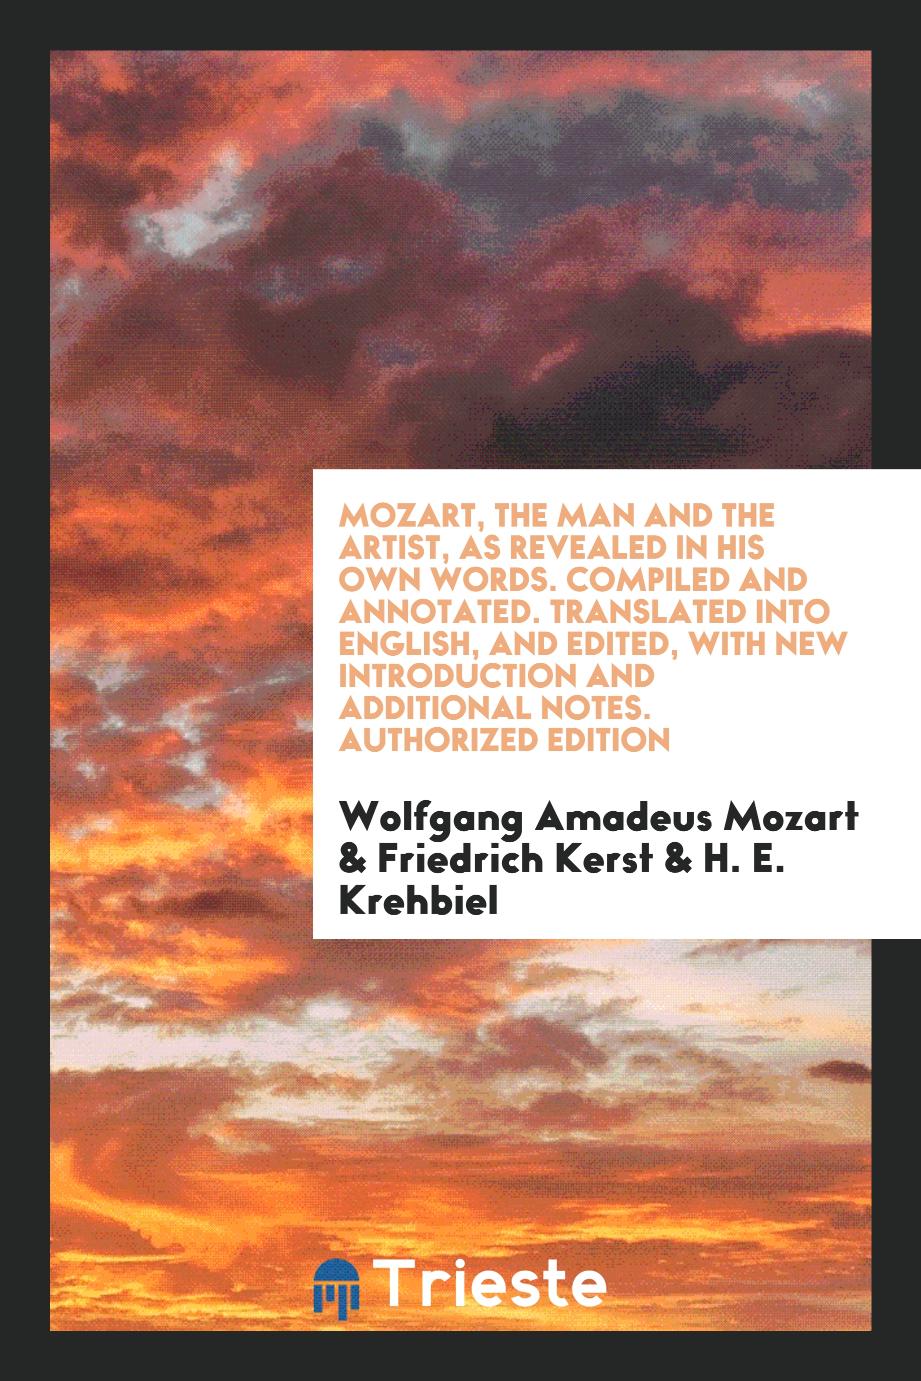 Mozart, the Man and the Artist, as Revealed in His Own Words. Compiled and Annotated. Translated into English, and Edited, with New Introduction and Additional Notes. Authorized Edition